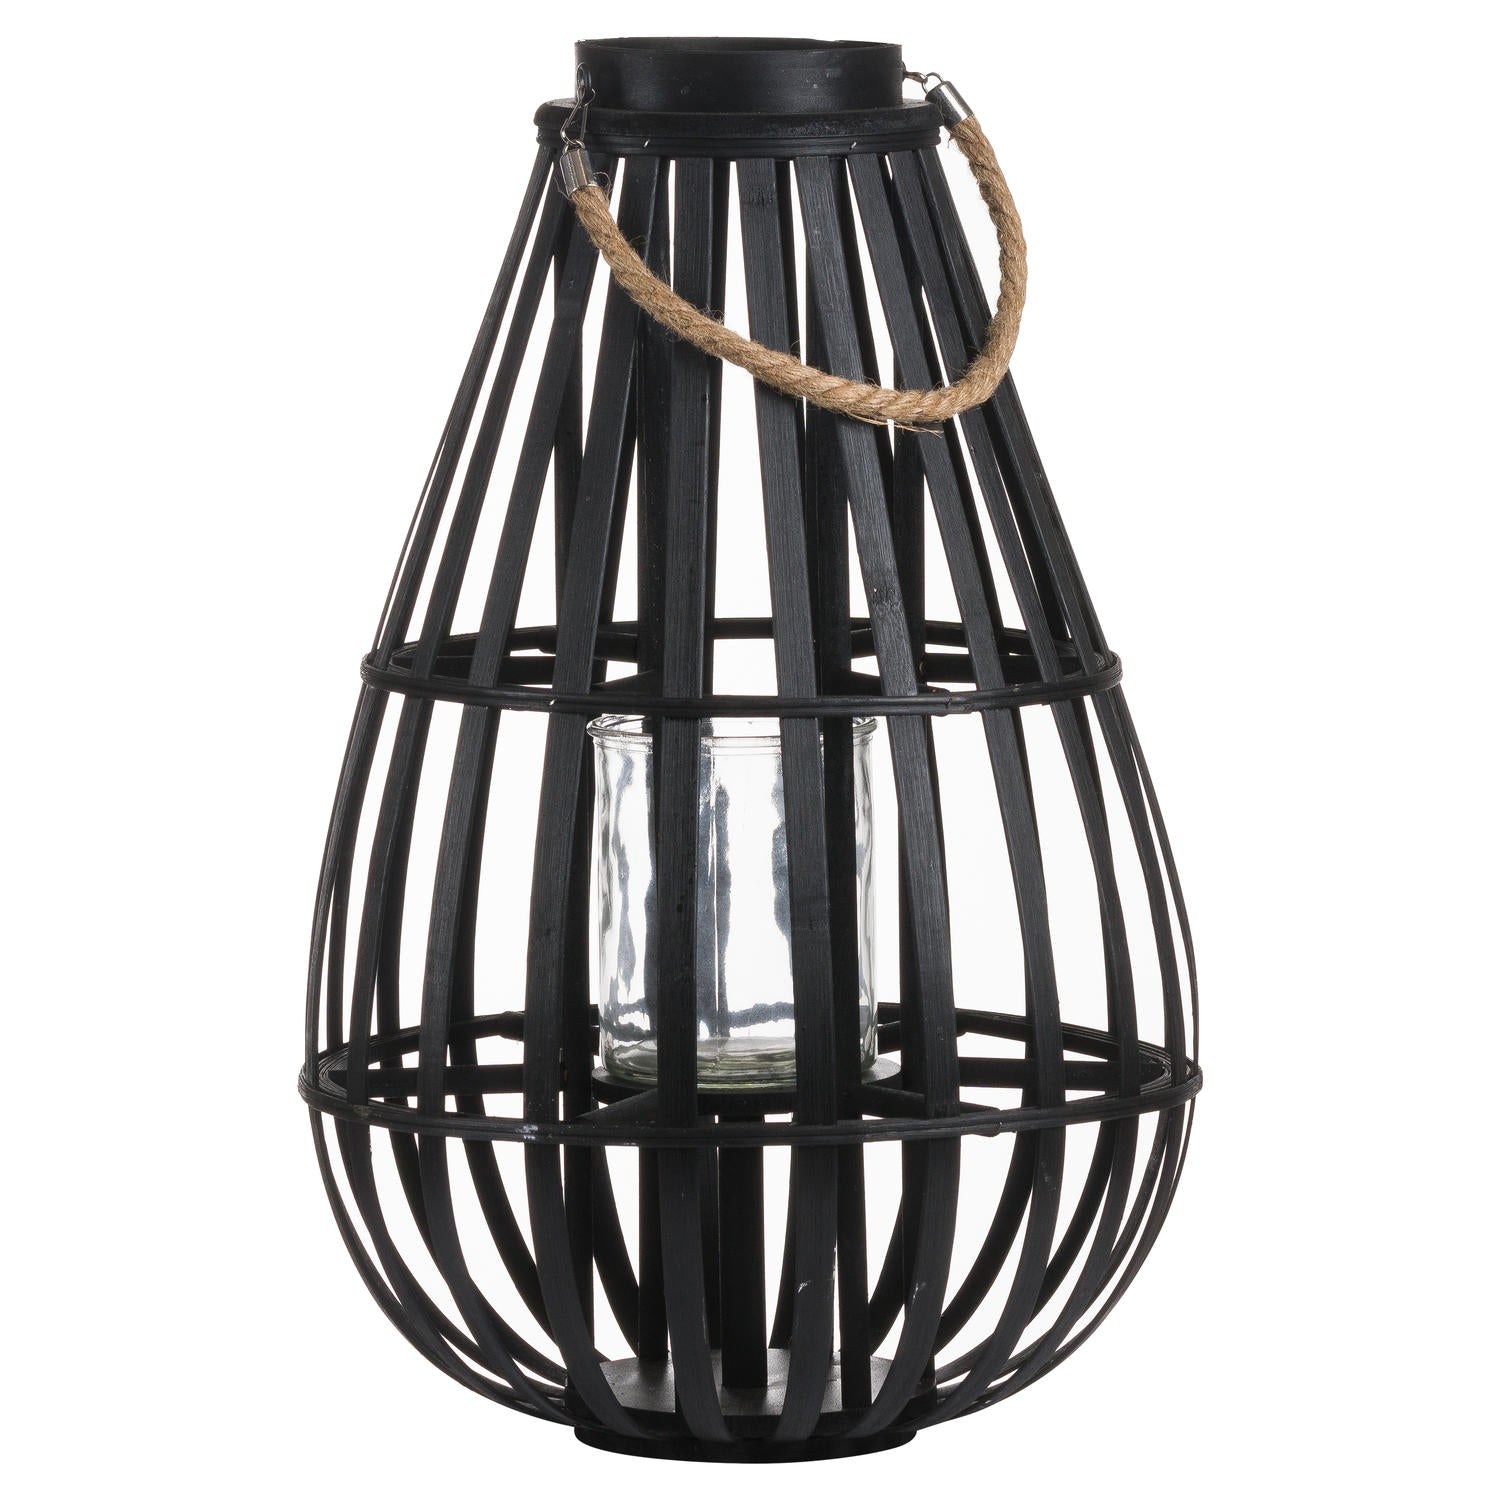 Floor Standing Domed Wicker Lantern With Rope Detail